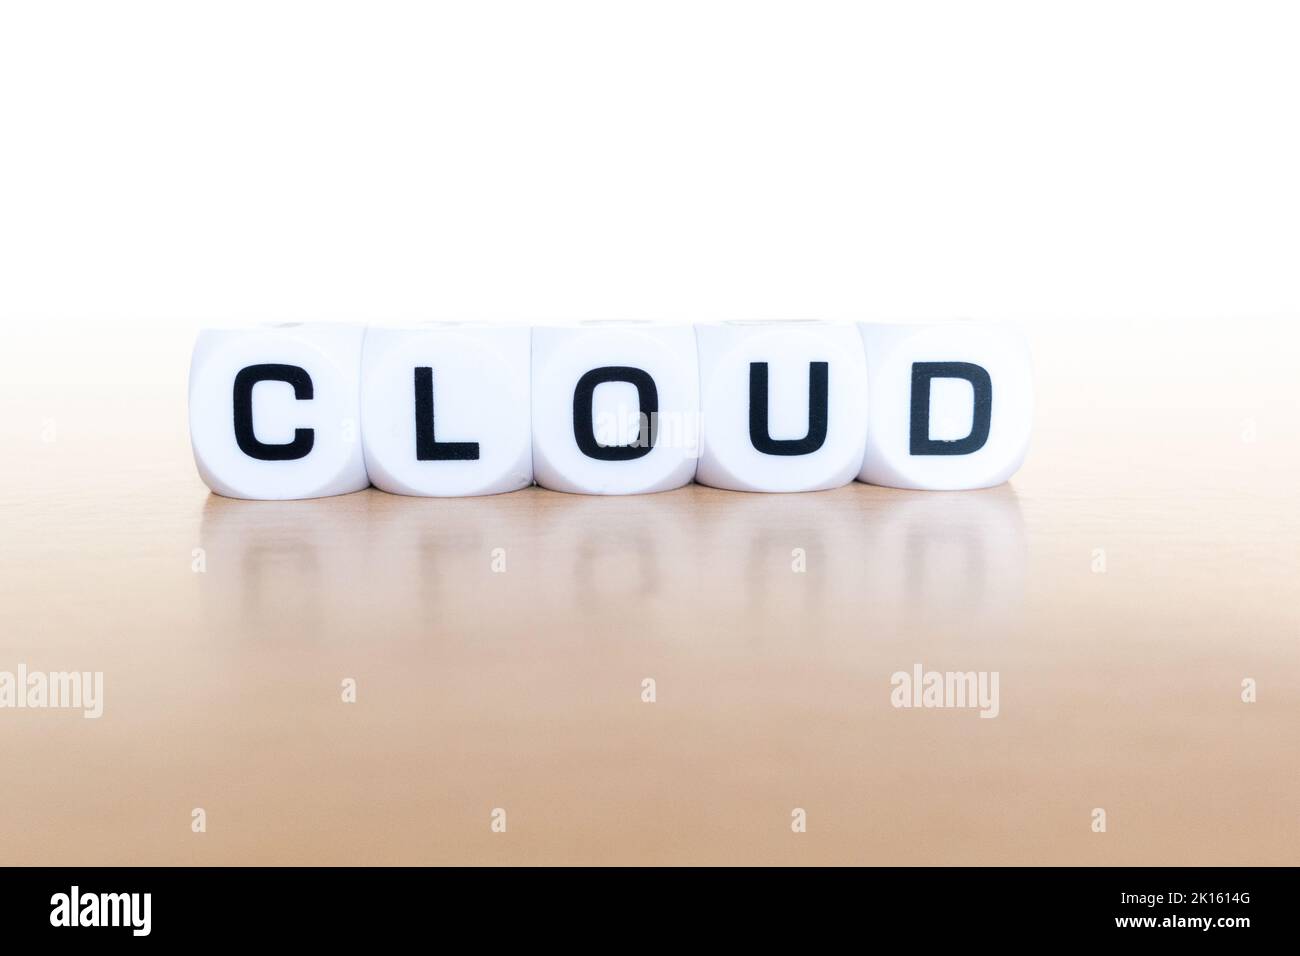 Cloud word spelled for Cloud computing Stock Photo